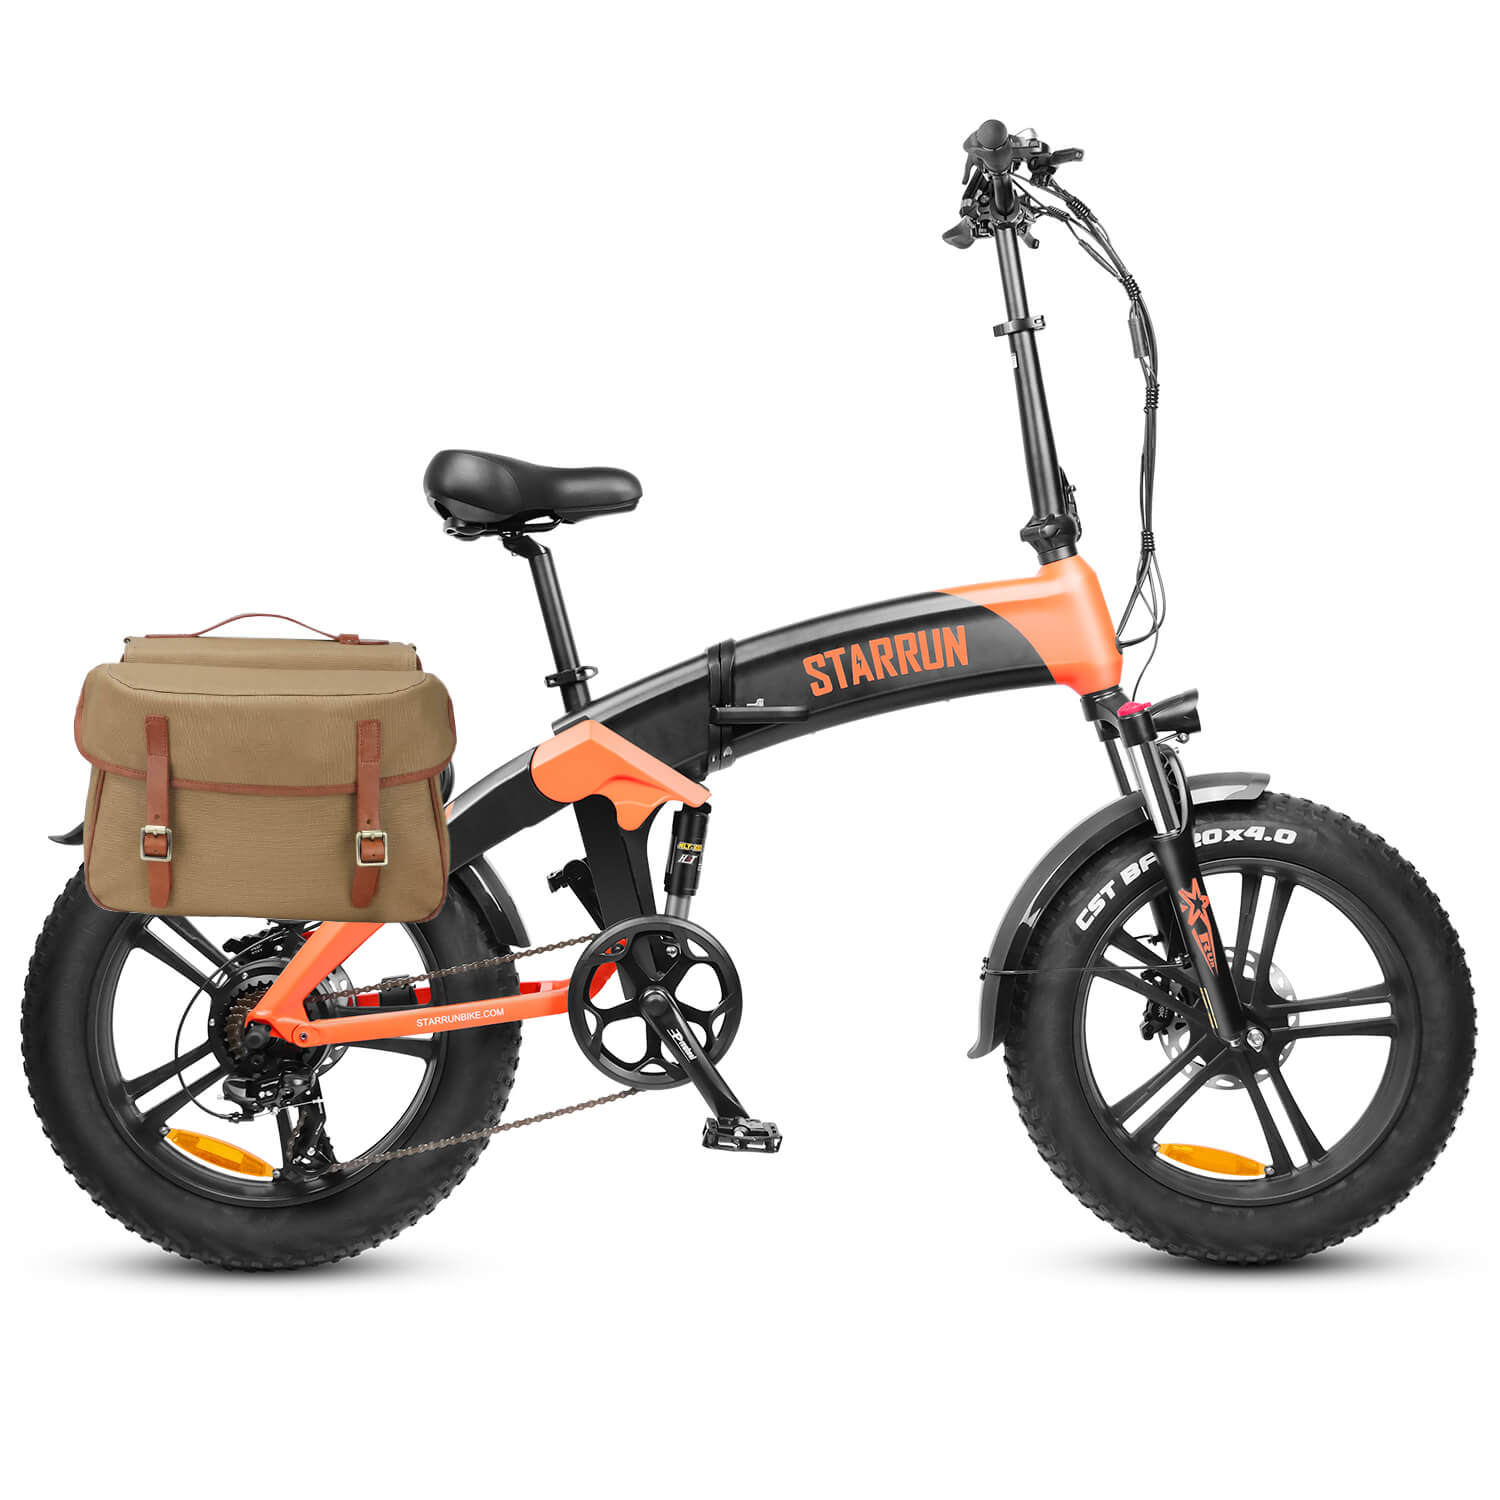 wallke electric bicycle s20, folding fat tire electric bicycle | high quality commuter electric bicycle | UL certified electric bicycle